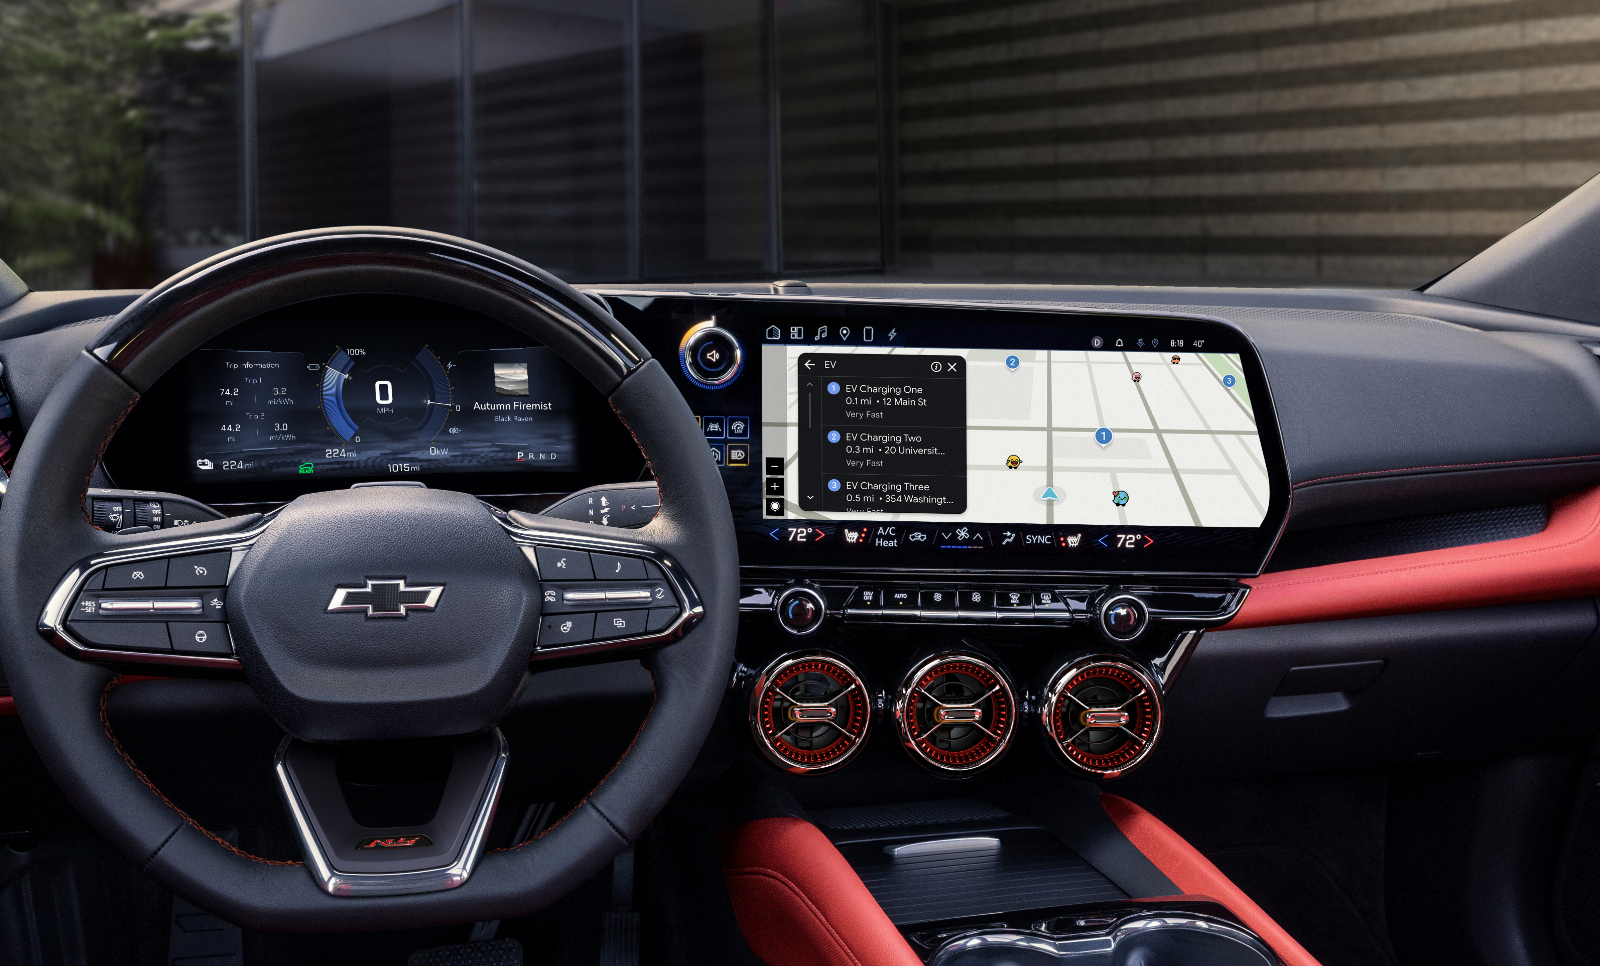 All the ways Google is driving deeper into the automotive world